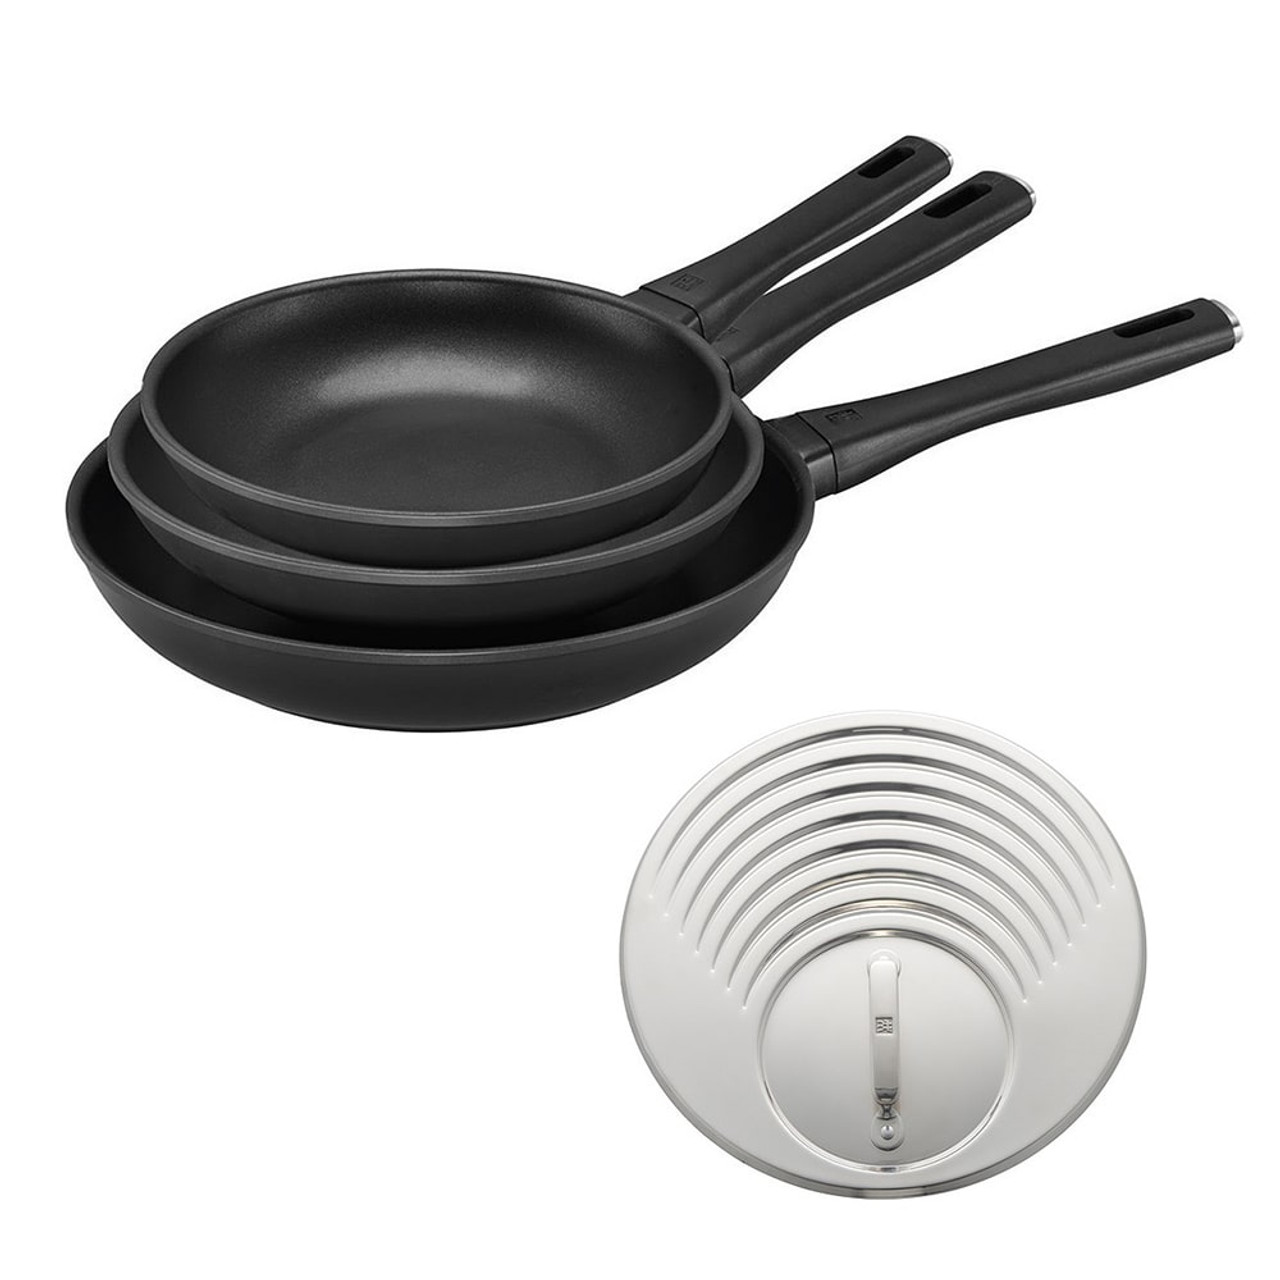 https://cdn11.bigcommerce.com/s-hccytny0od/images/stencil/1280x1280/products/3655/13039/zwilling-madura-plus-4pc-nonstick-fry-pan-set__40351.1603291322.jpg?c=2?imbypass=on